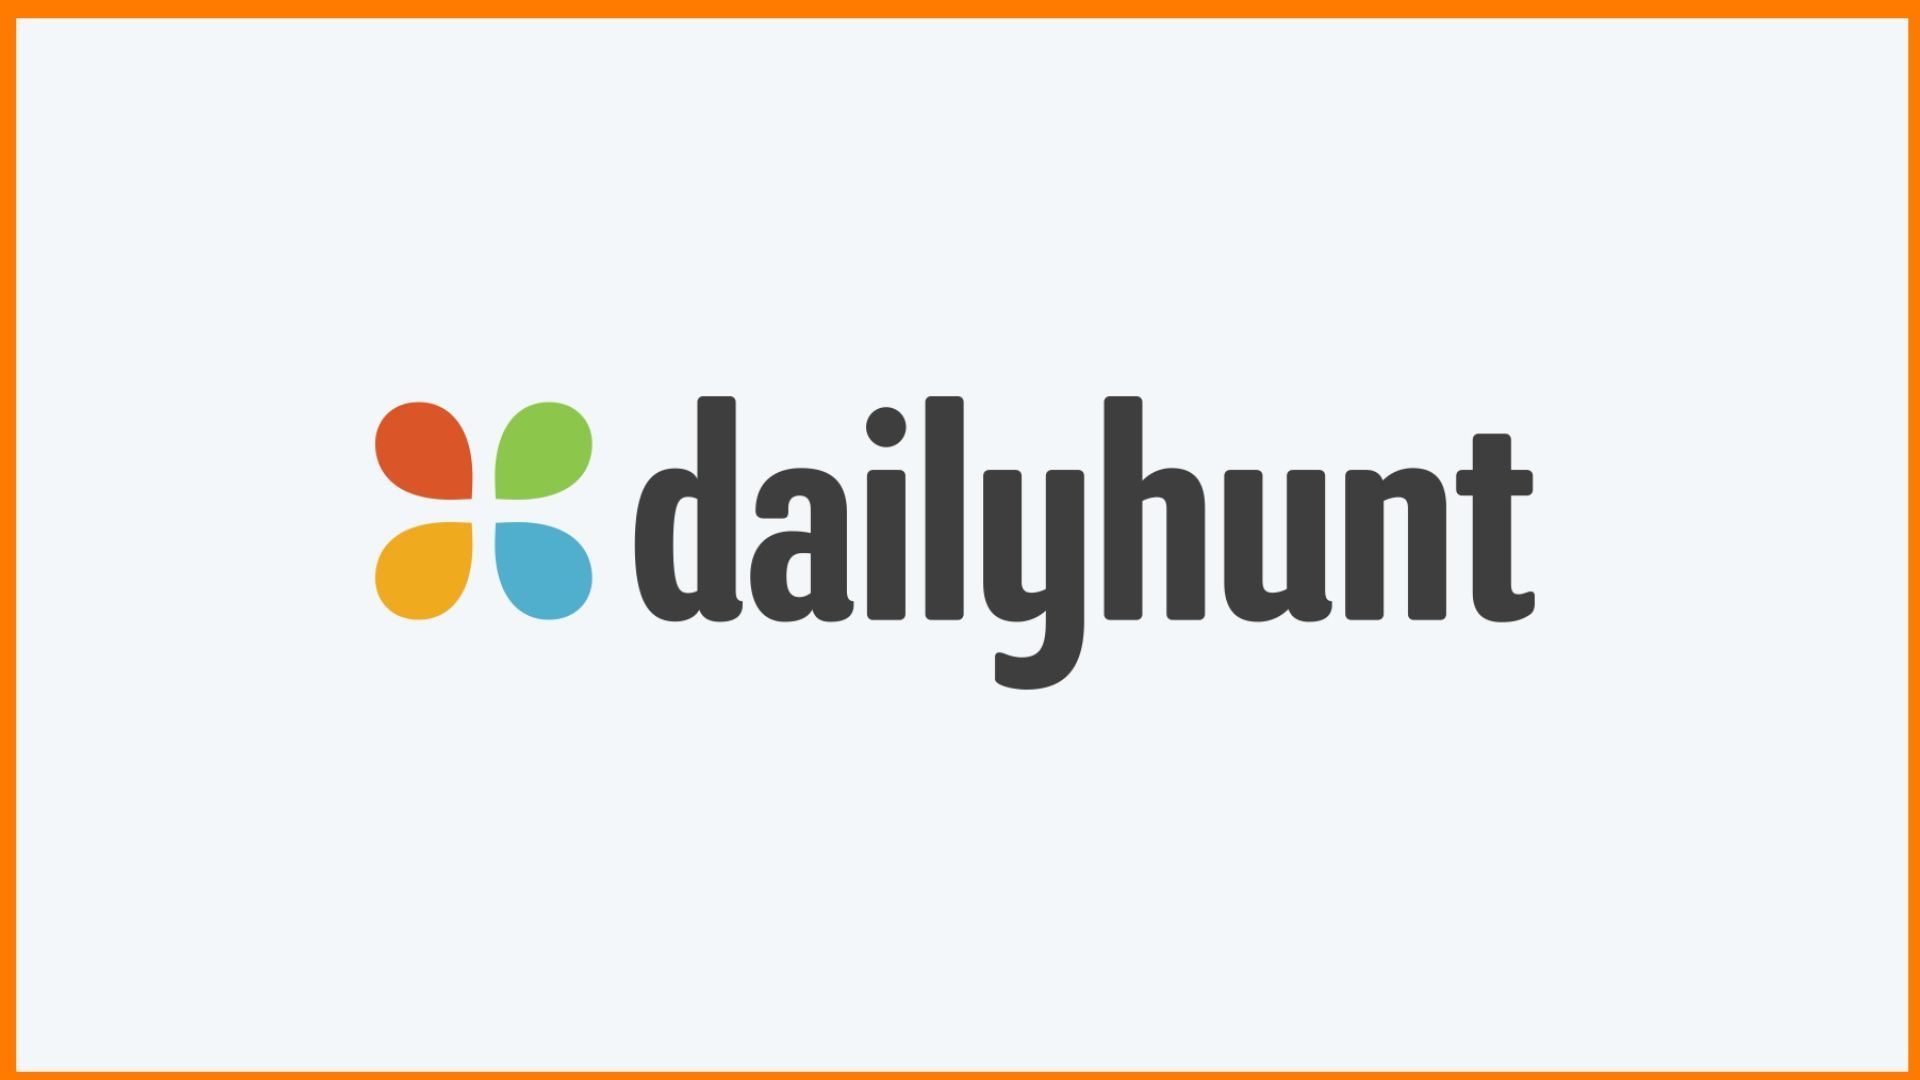 Dailyhunt - Get Your Daily Dose of News and Content in Your Very Own Language